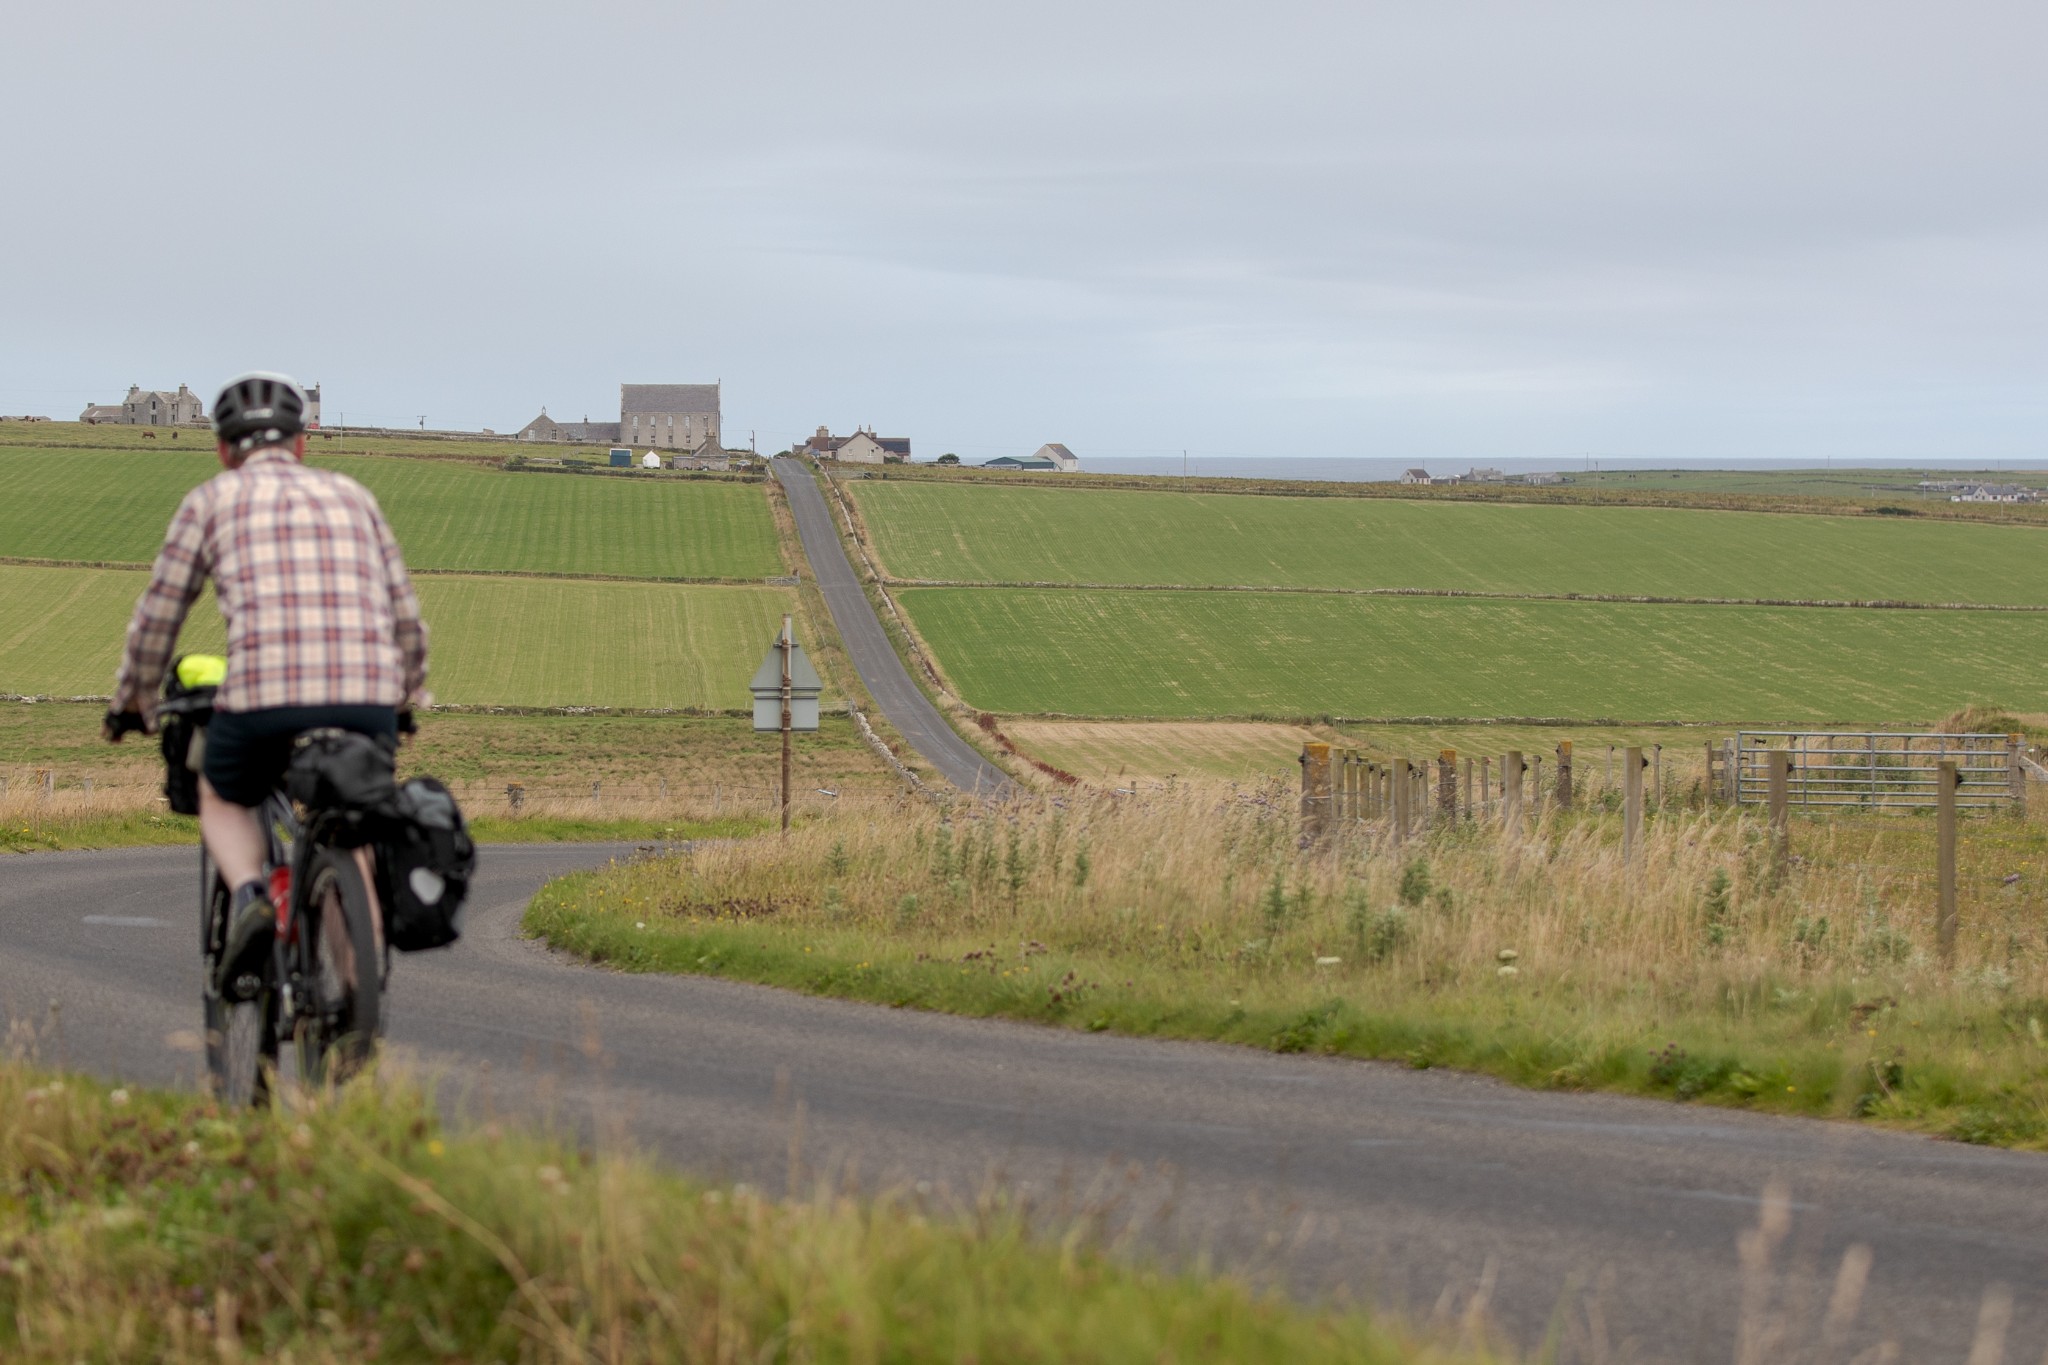 Cycling in Westray, Orkney